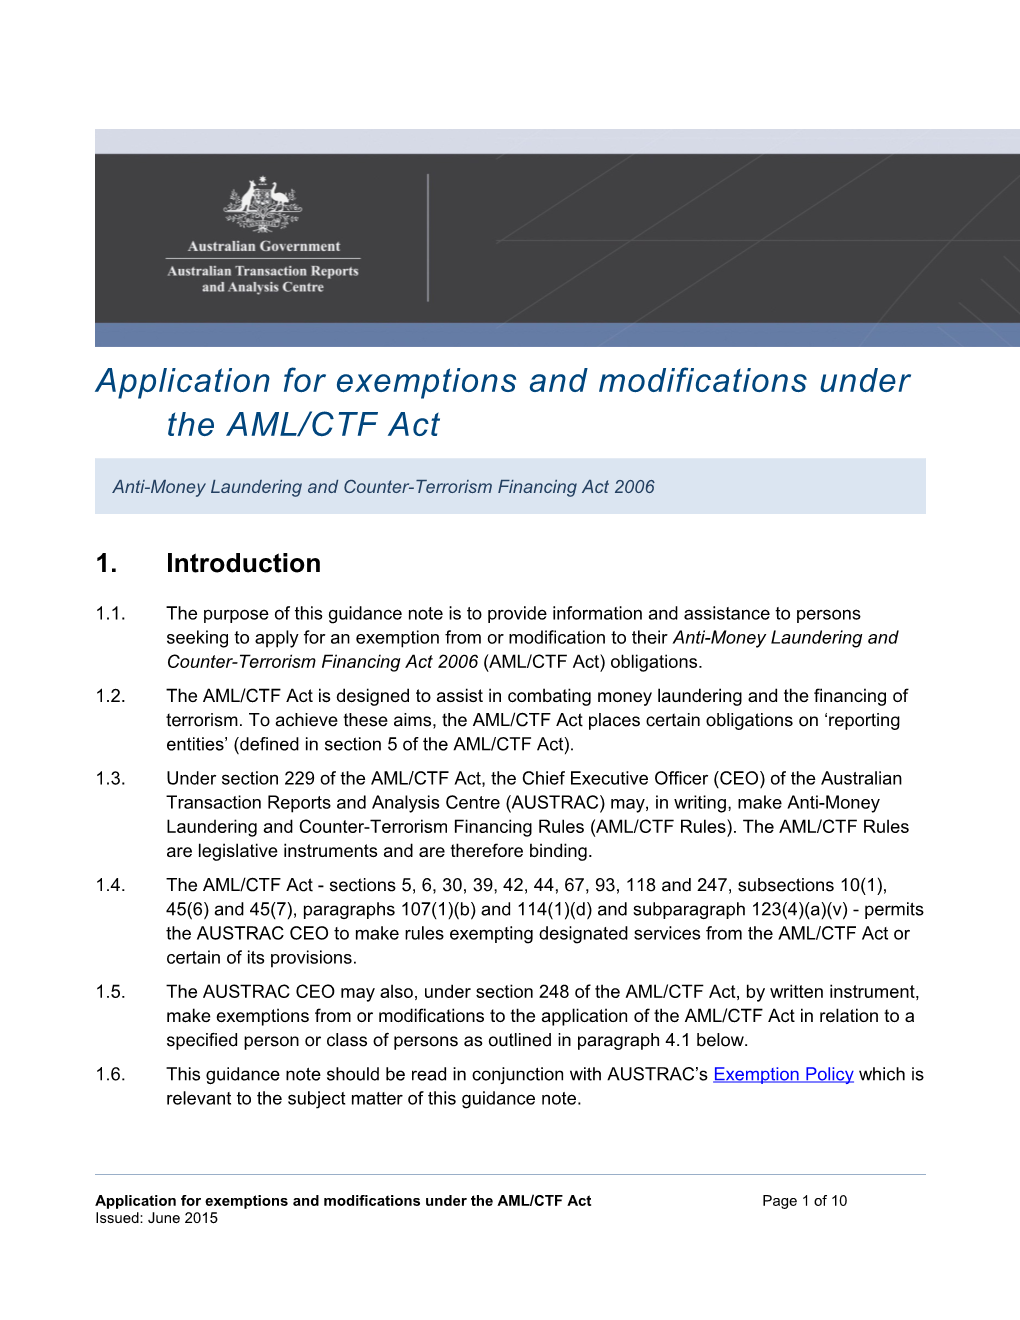 Application for Exemptions and Modifications Under the AML/CTF Act